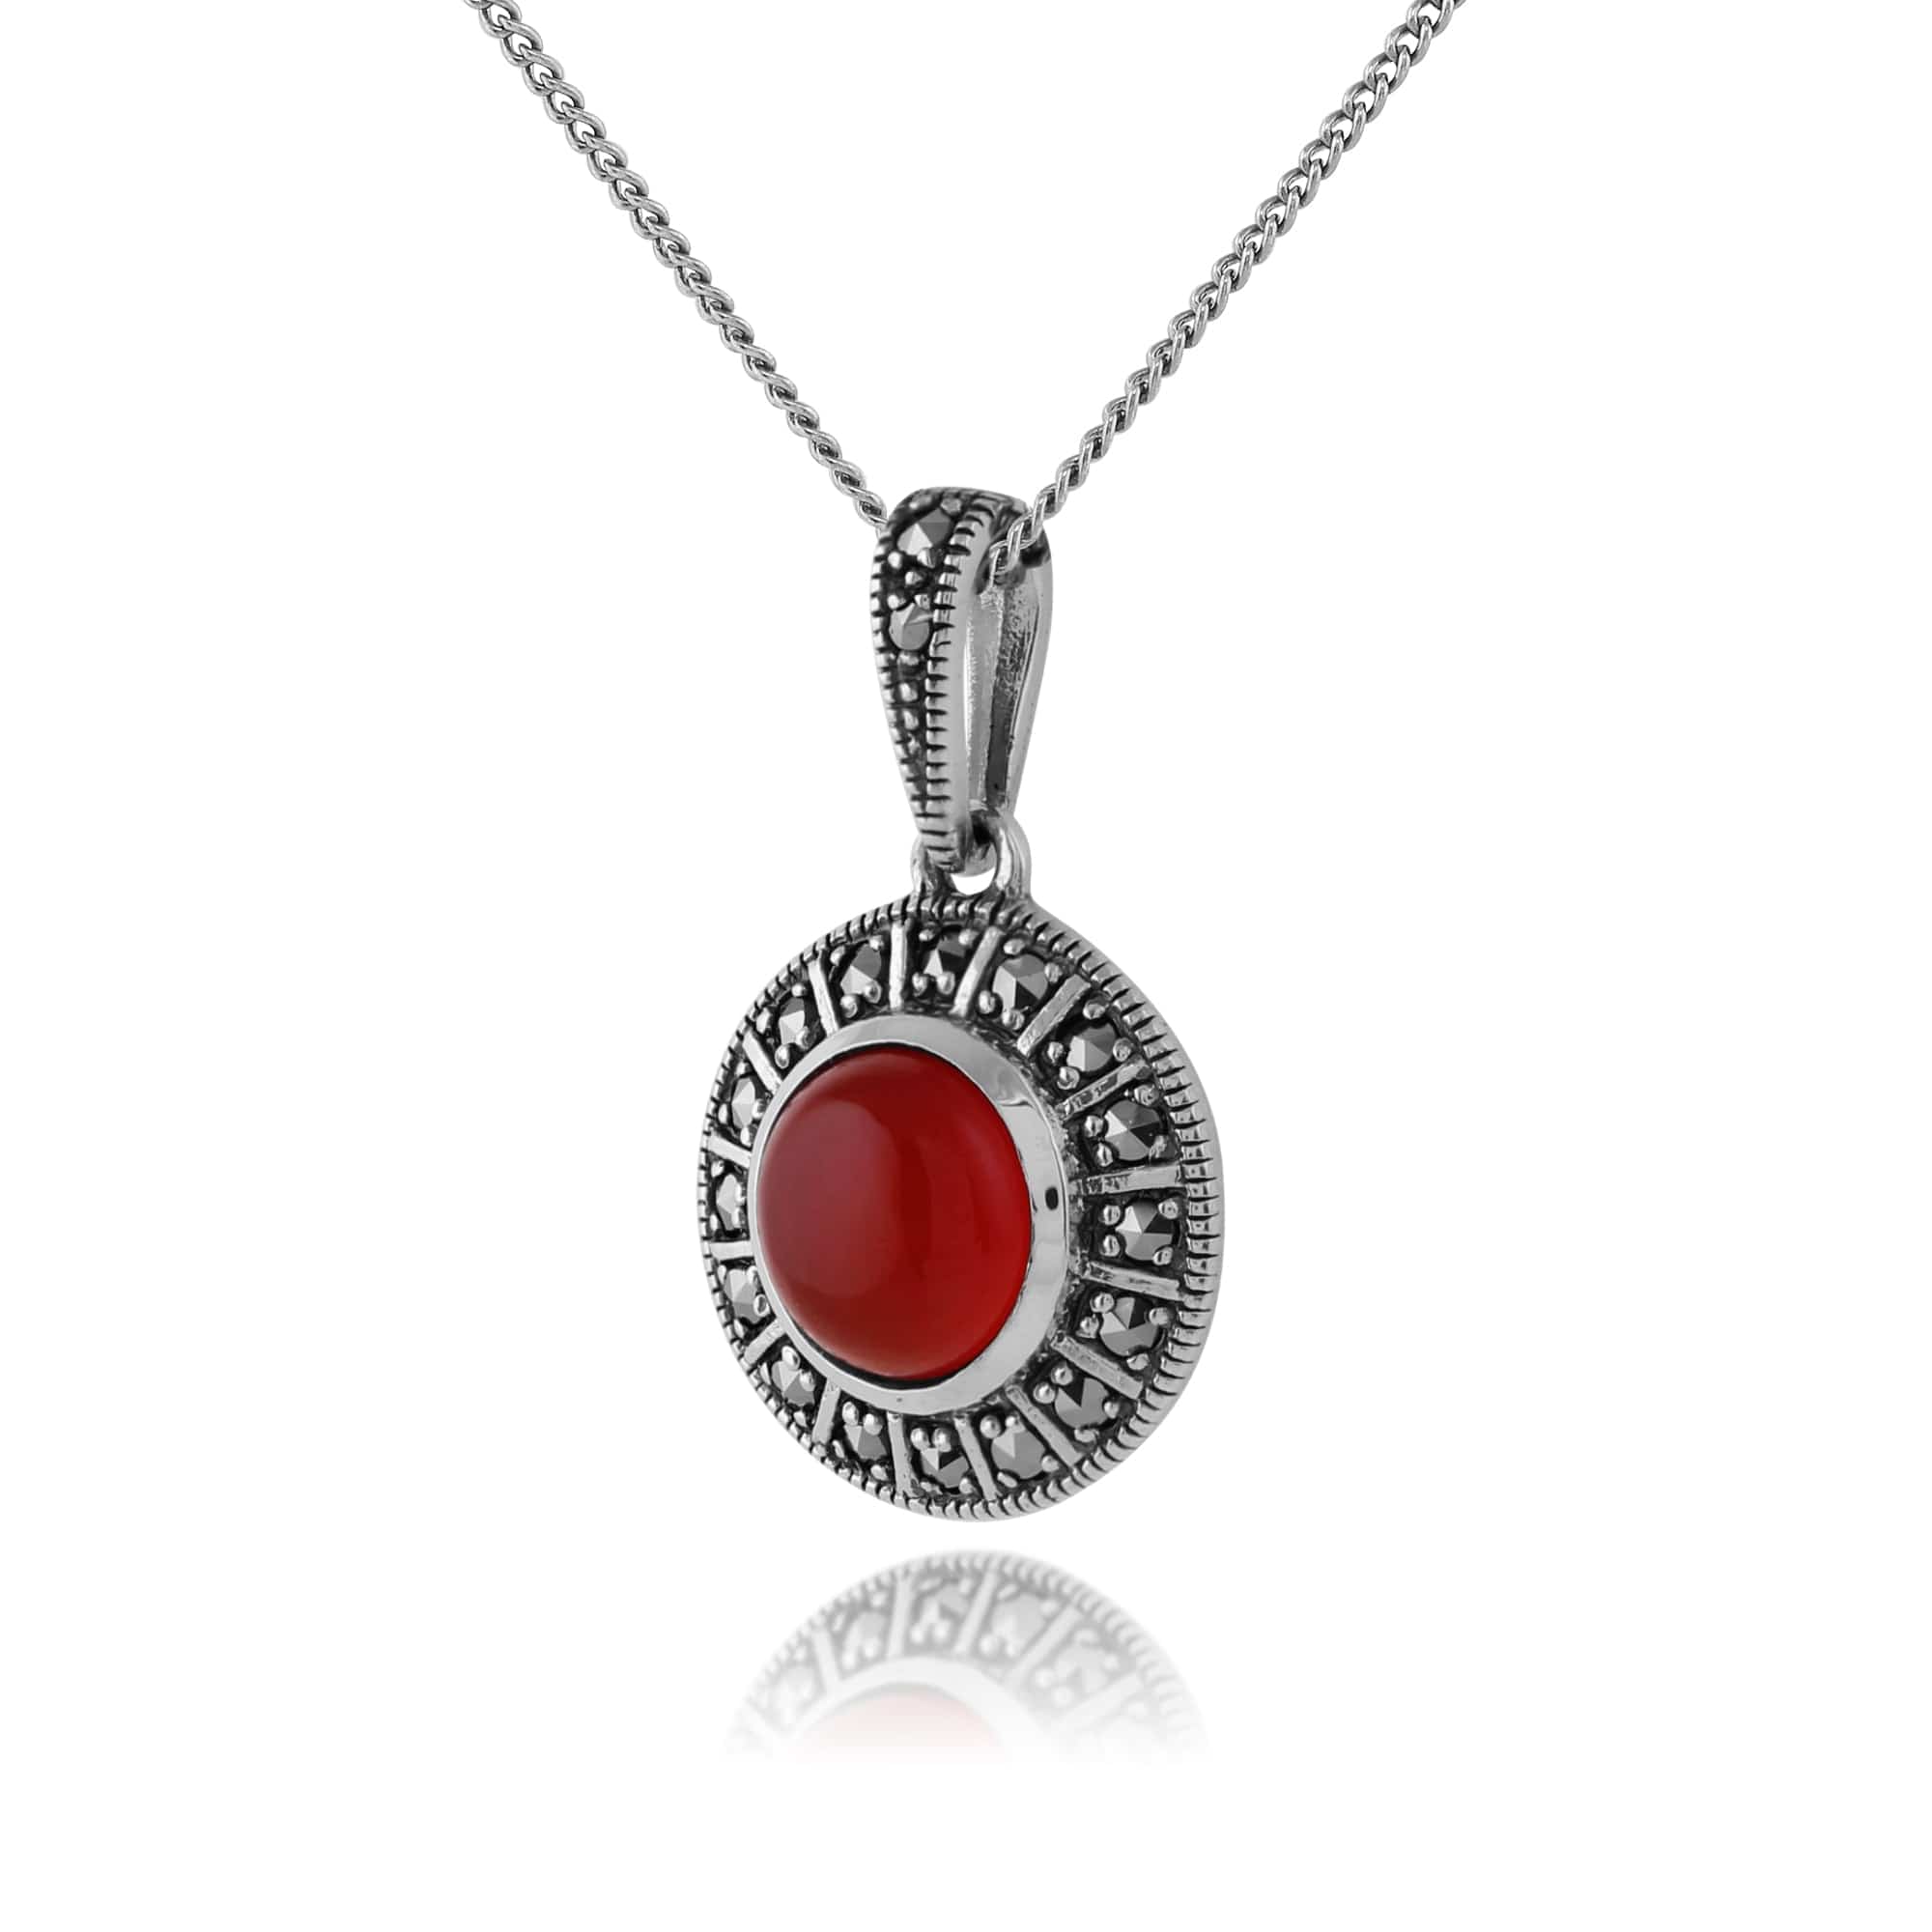 214N646501925 Art Deco Style Round Carnelian Cabochon & Marcasite Pendant in 925 Sterling Silver 2